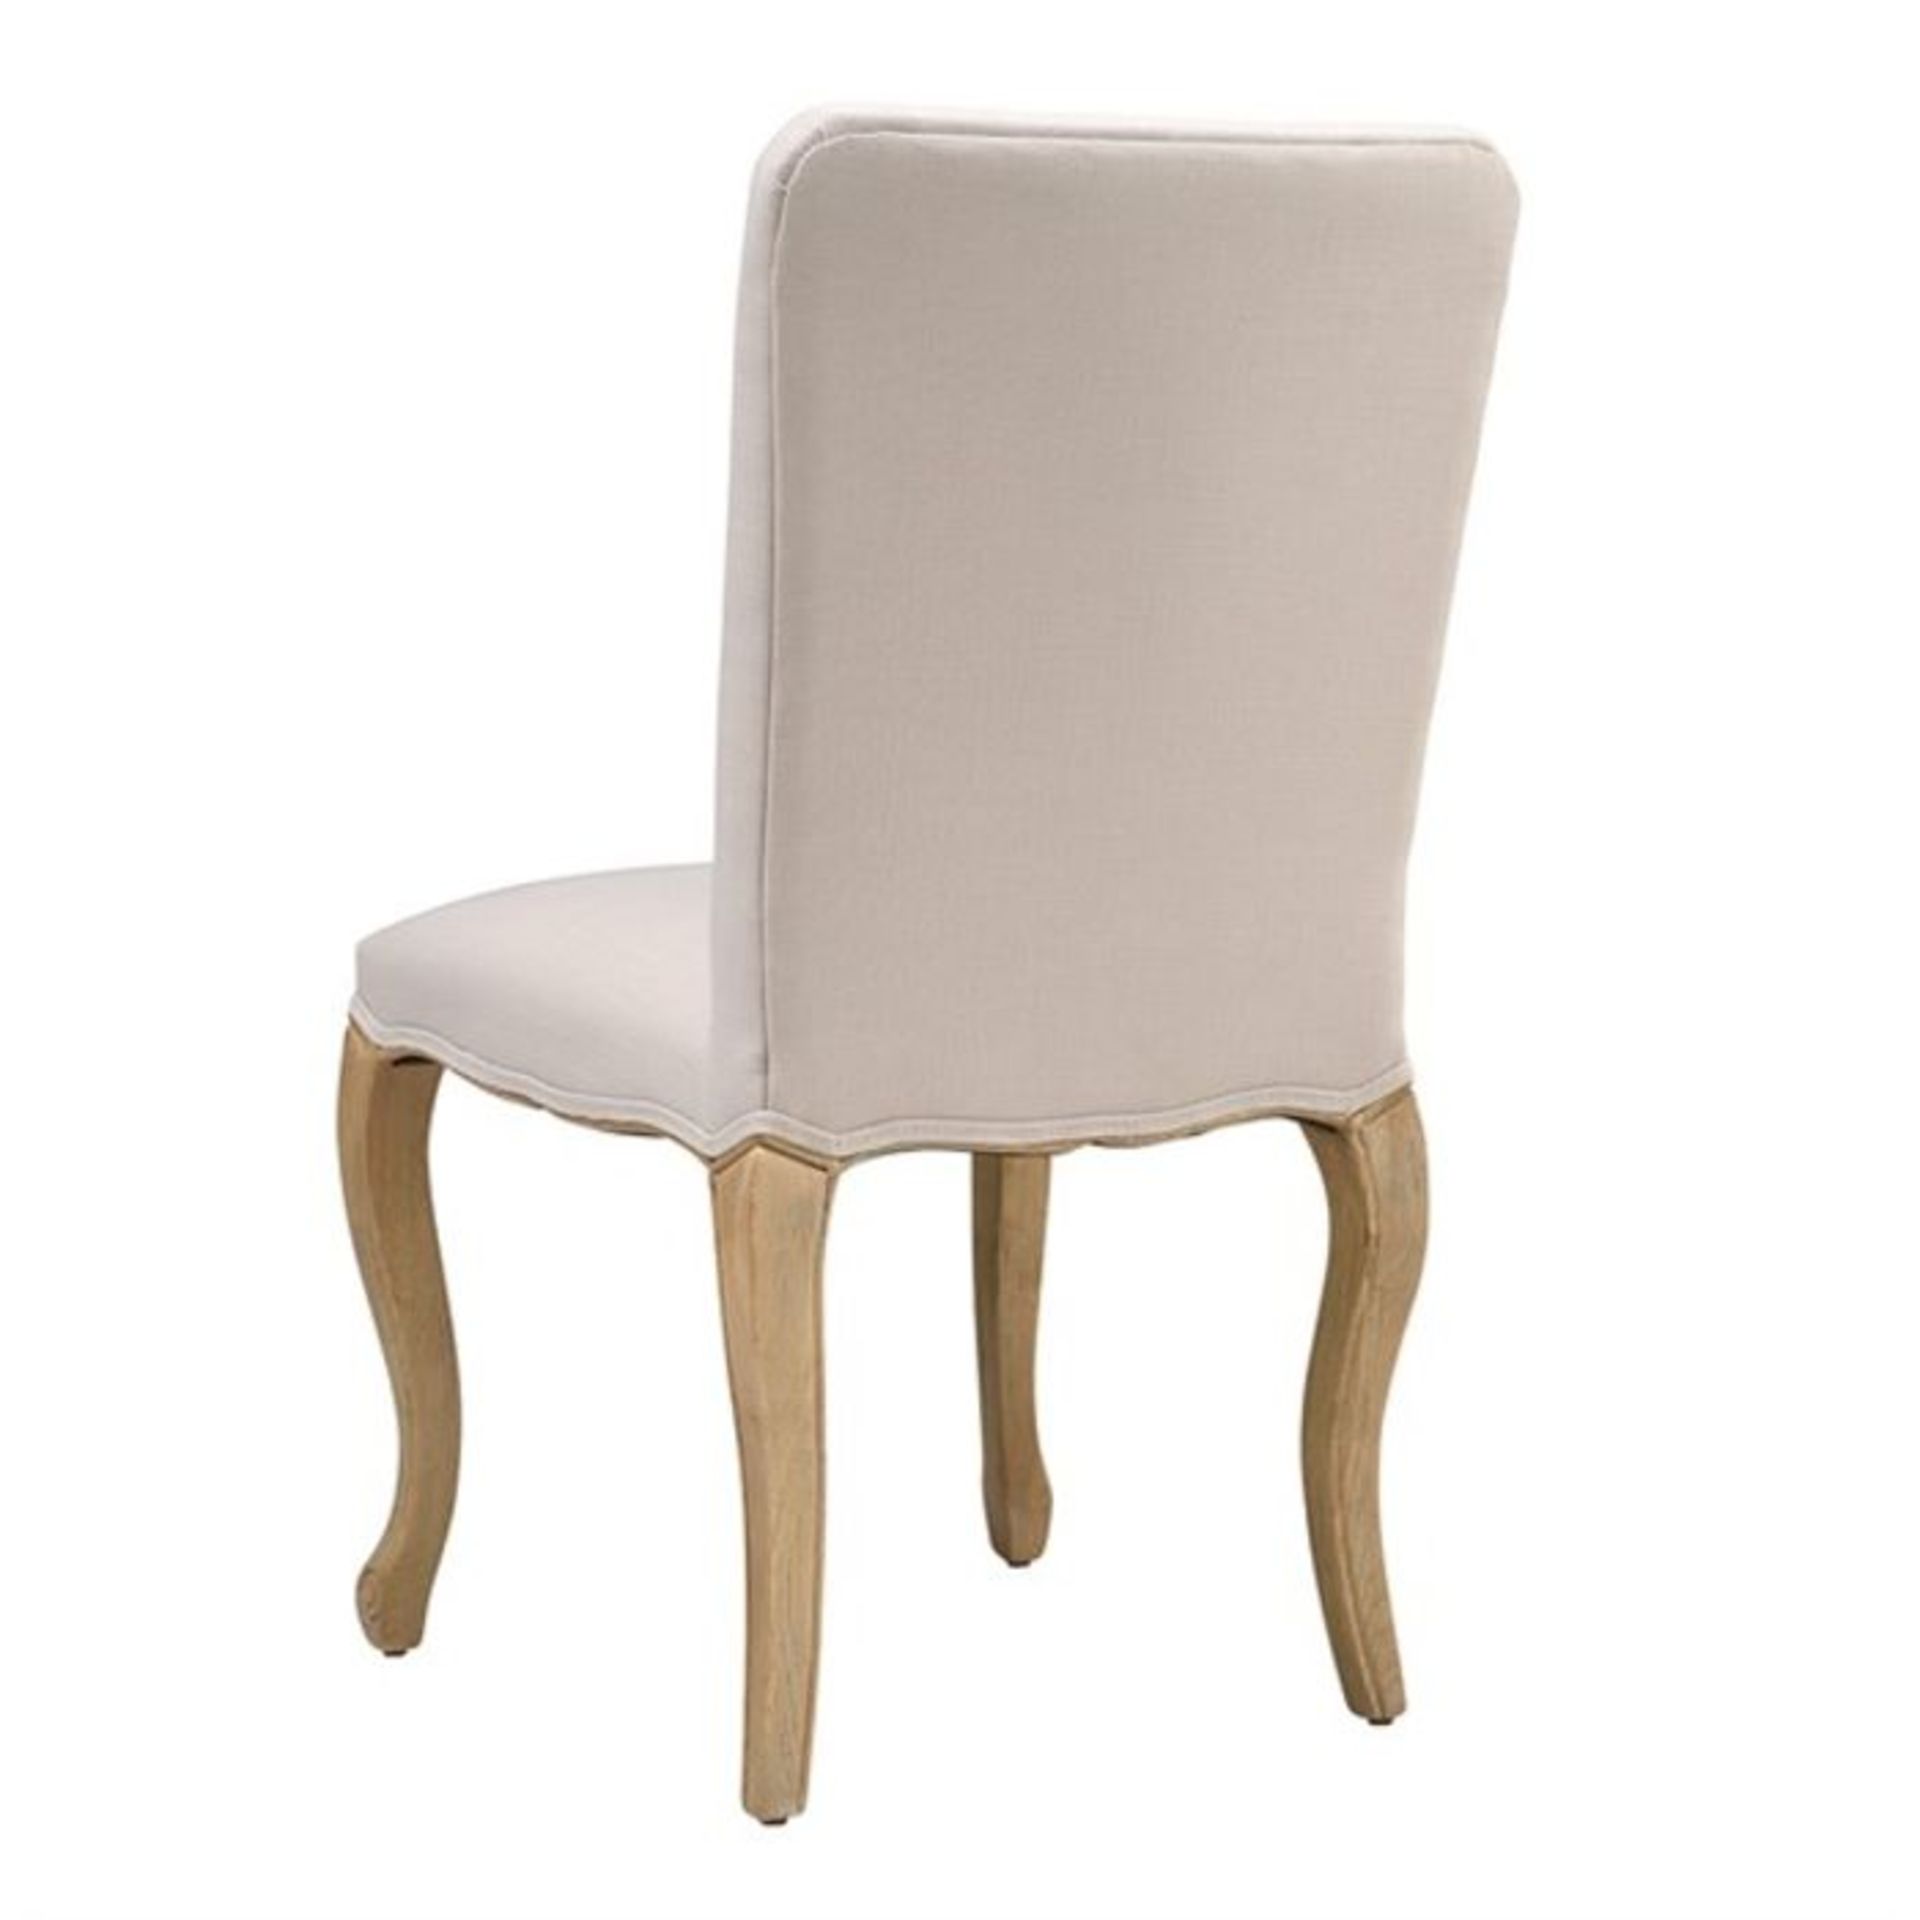 Cotswold Company Camille Limewash Oak Stone Linen Dining Chair RRP ?275.00 Complementing the Camille - Image 4 of 9